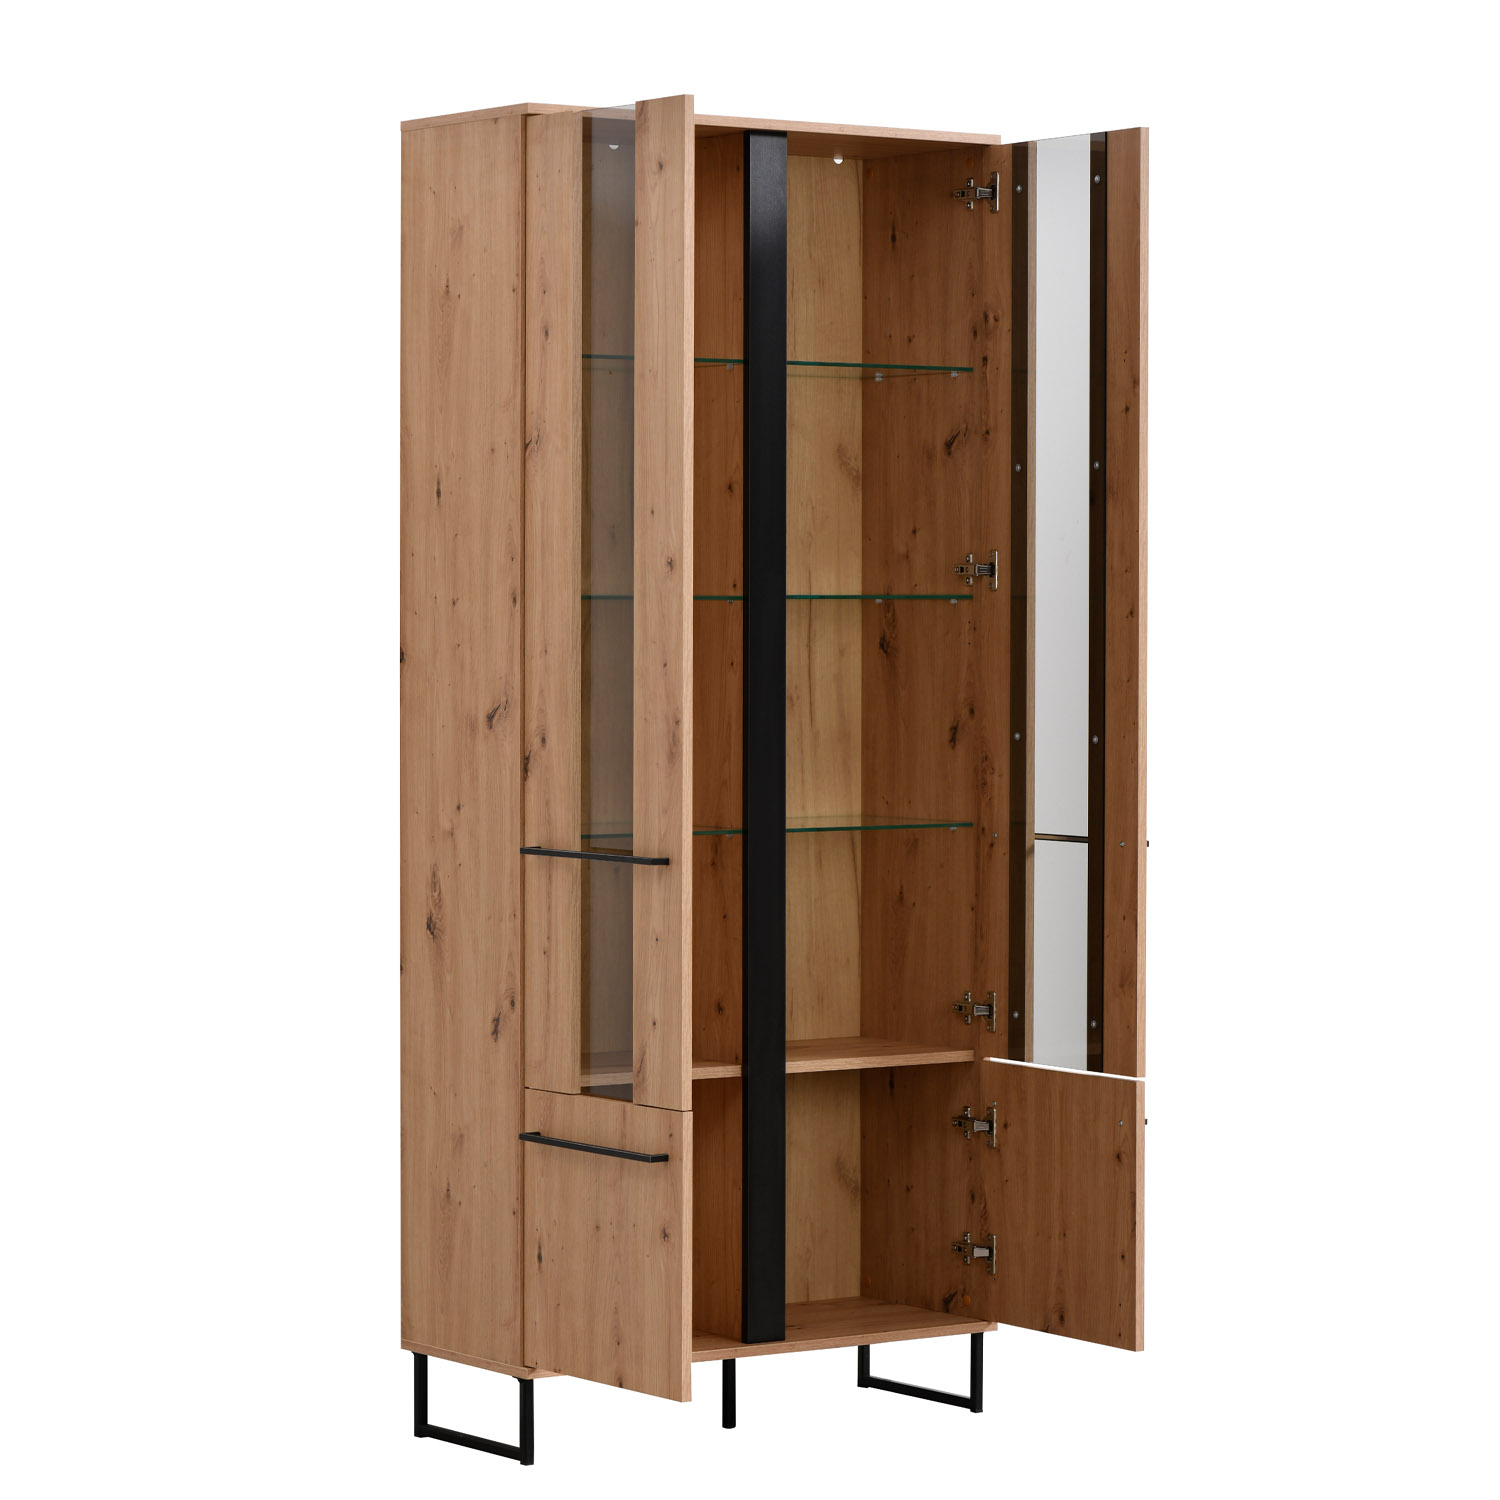 Showcase Highboard Cabinet with compartments Living room cabinet Wood Natural Skid feet Black